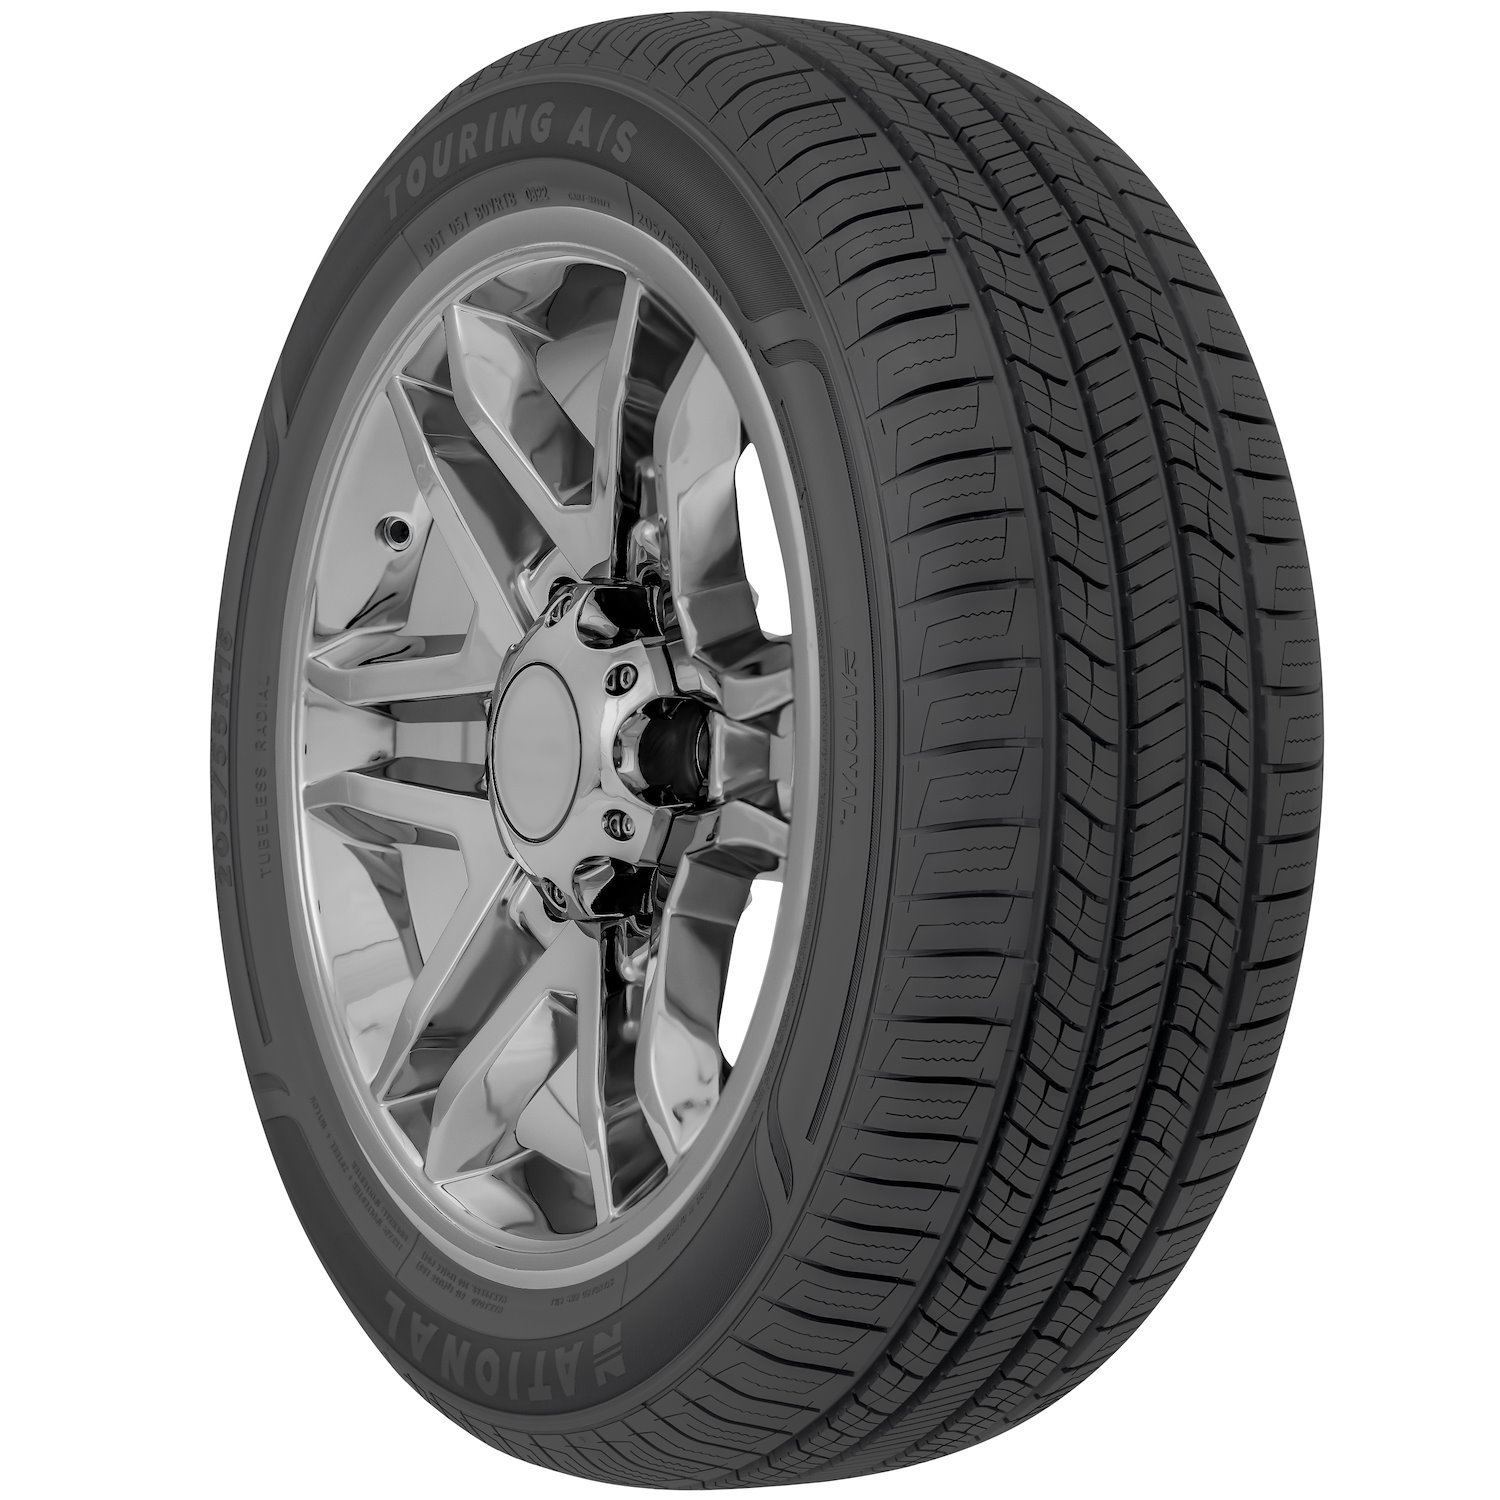 NLR78 Touring A/S Tire, 225/40R18